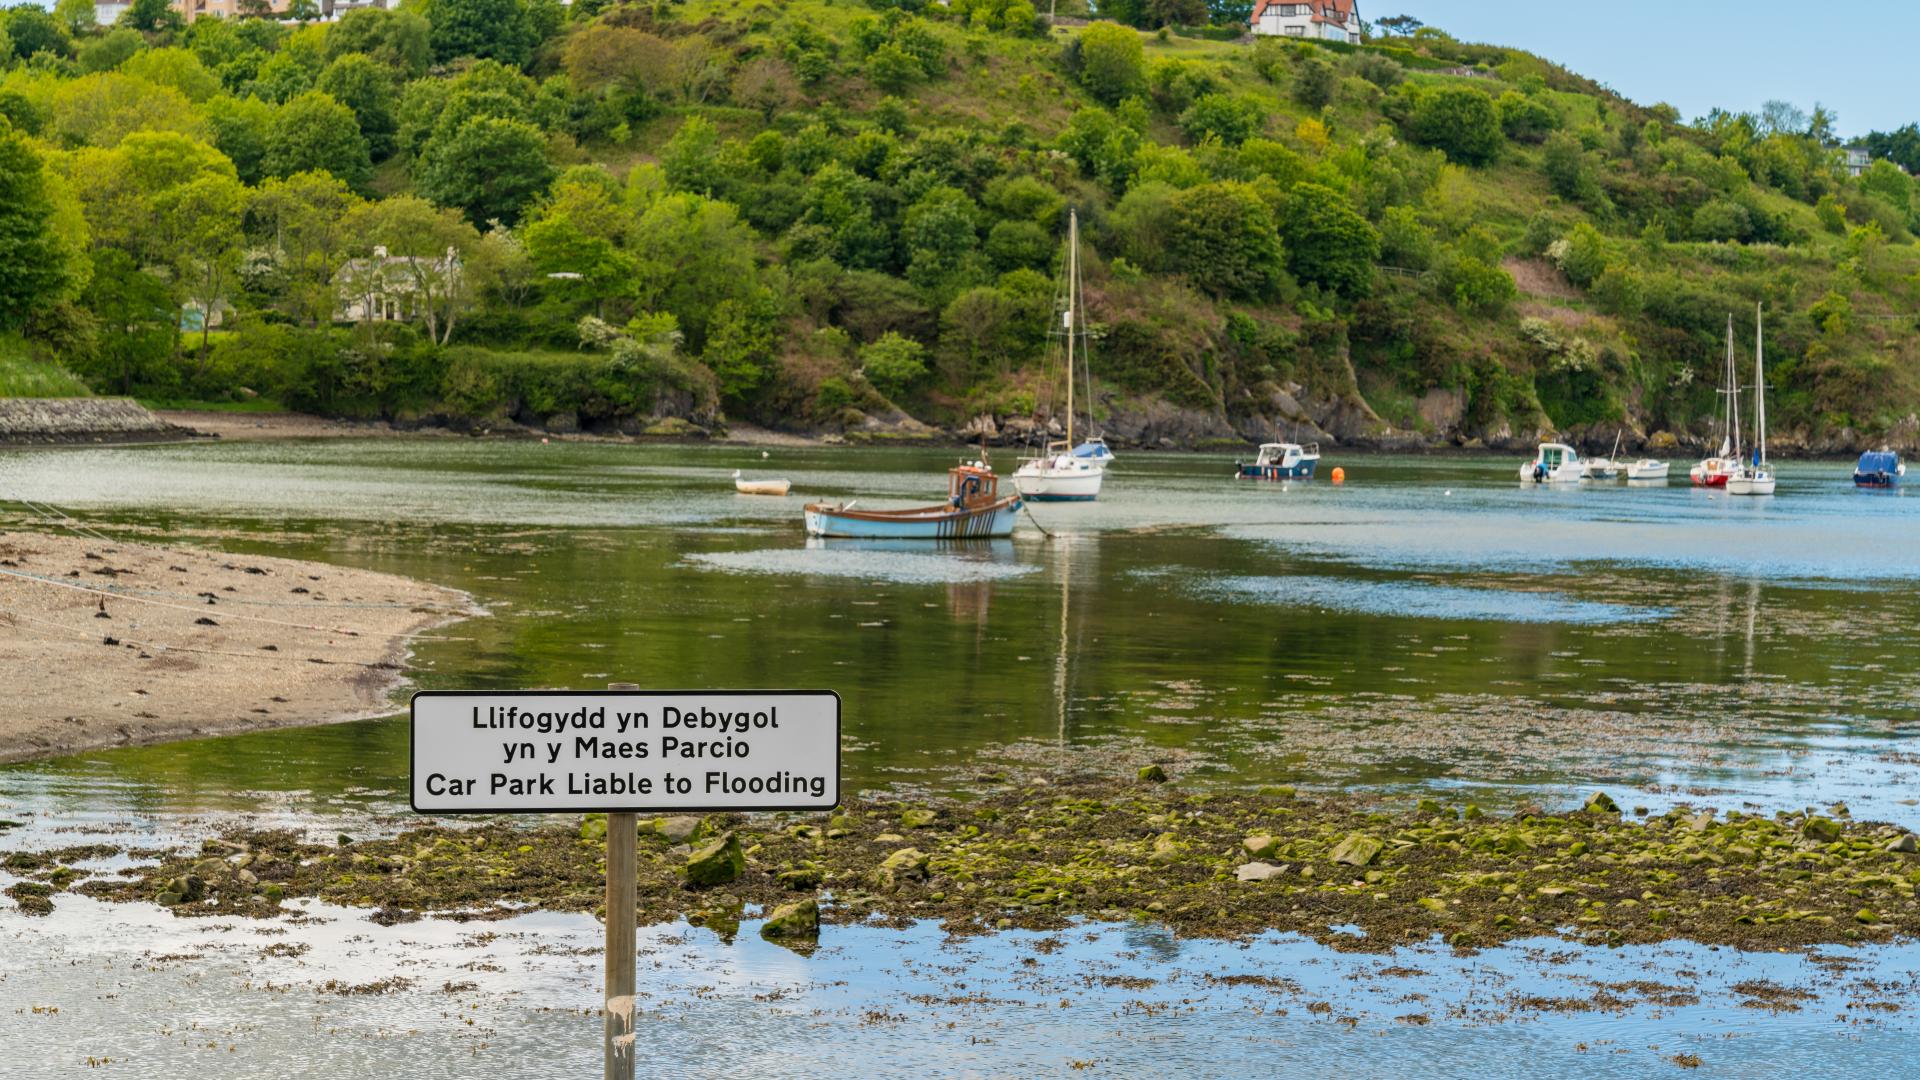 Sign in English and Welsh in front of flooded car park by river estuary, wooded slopes in background